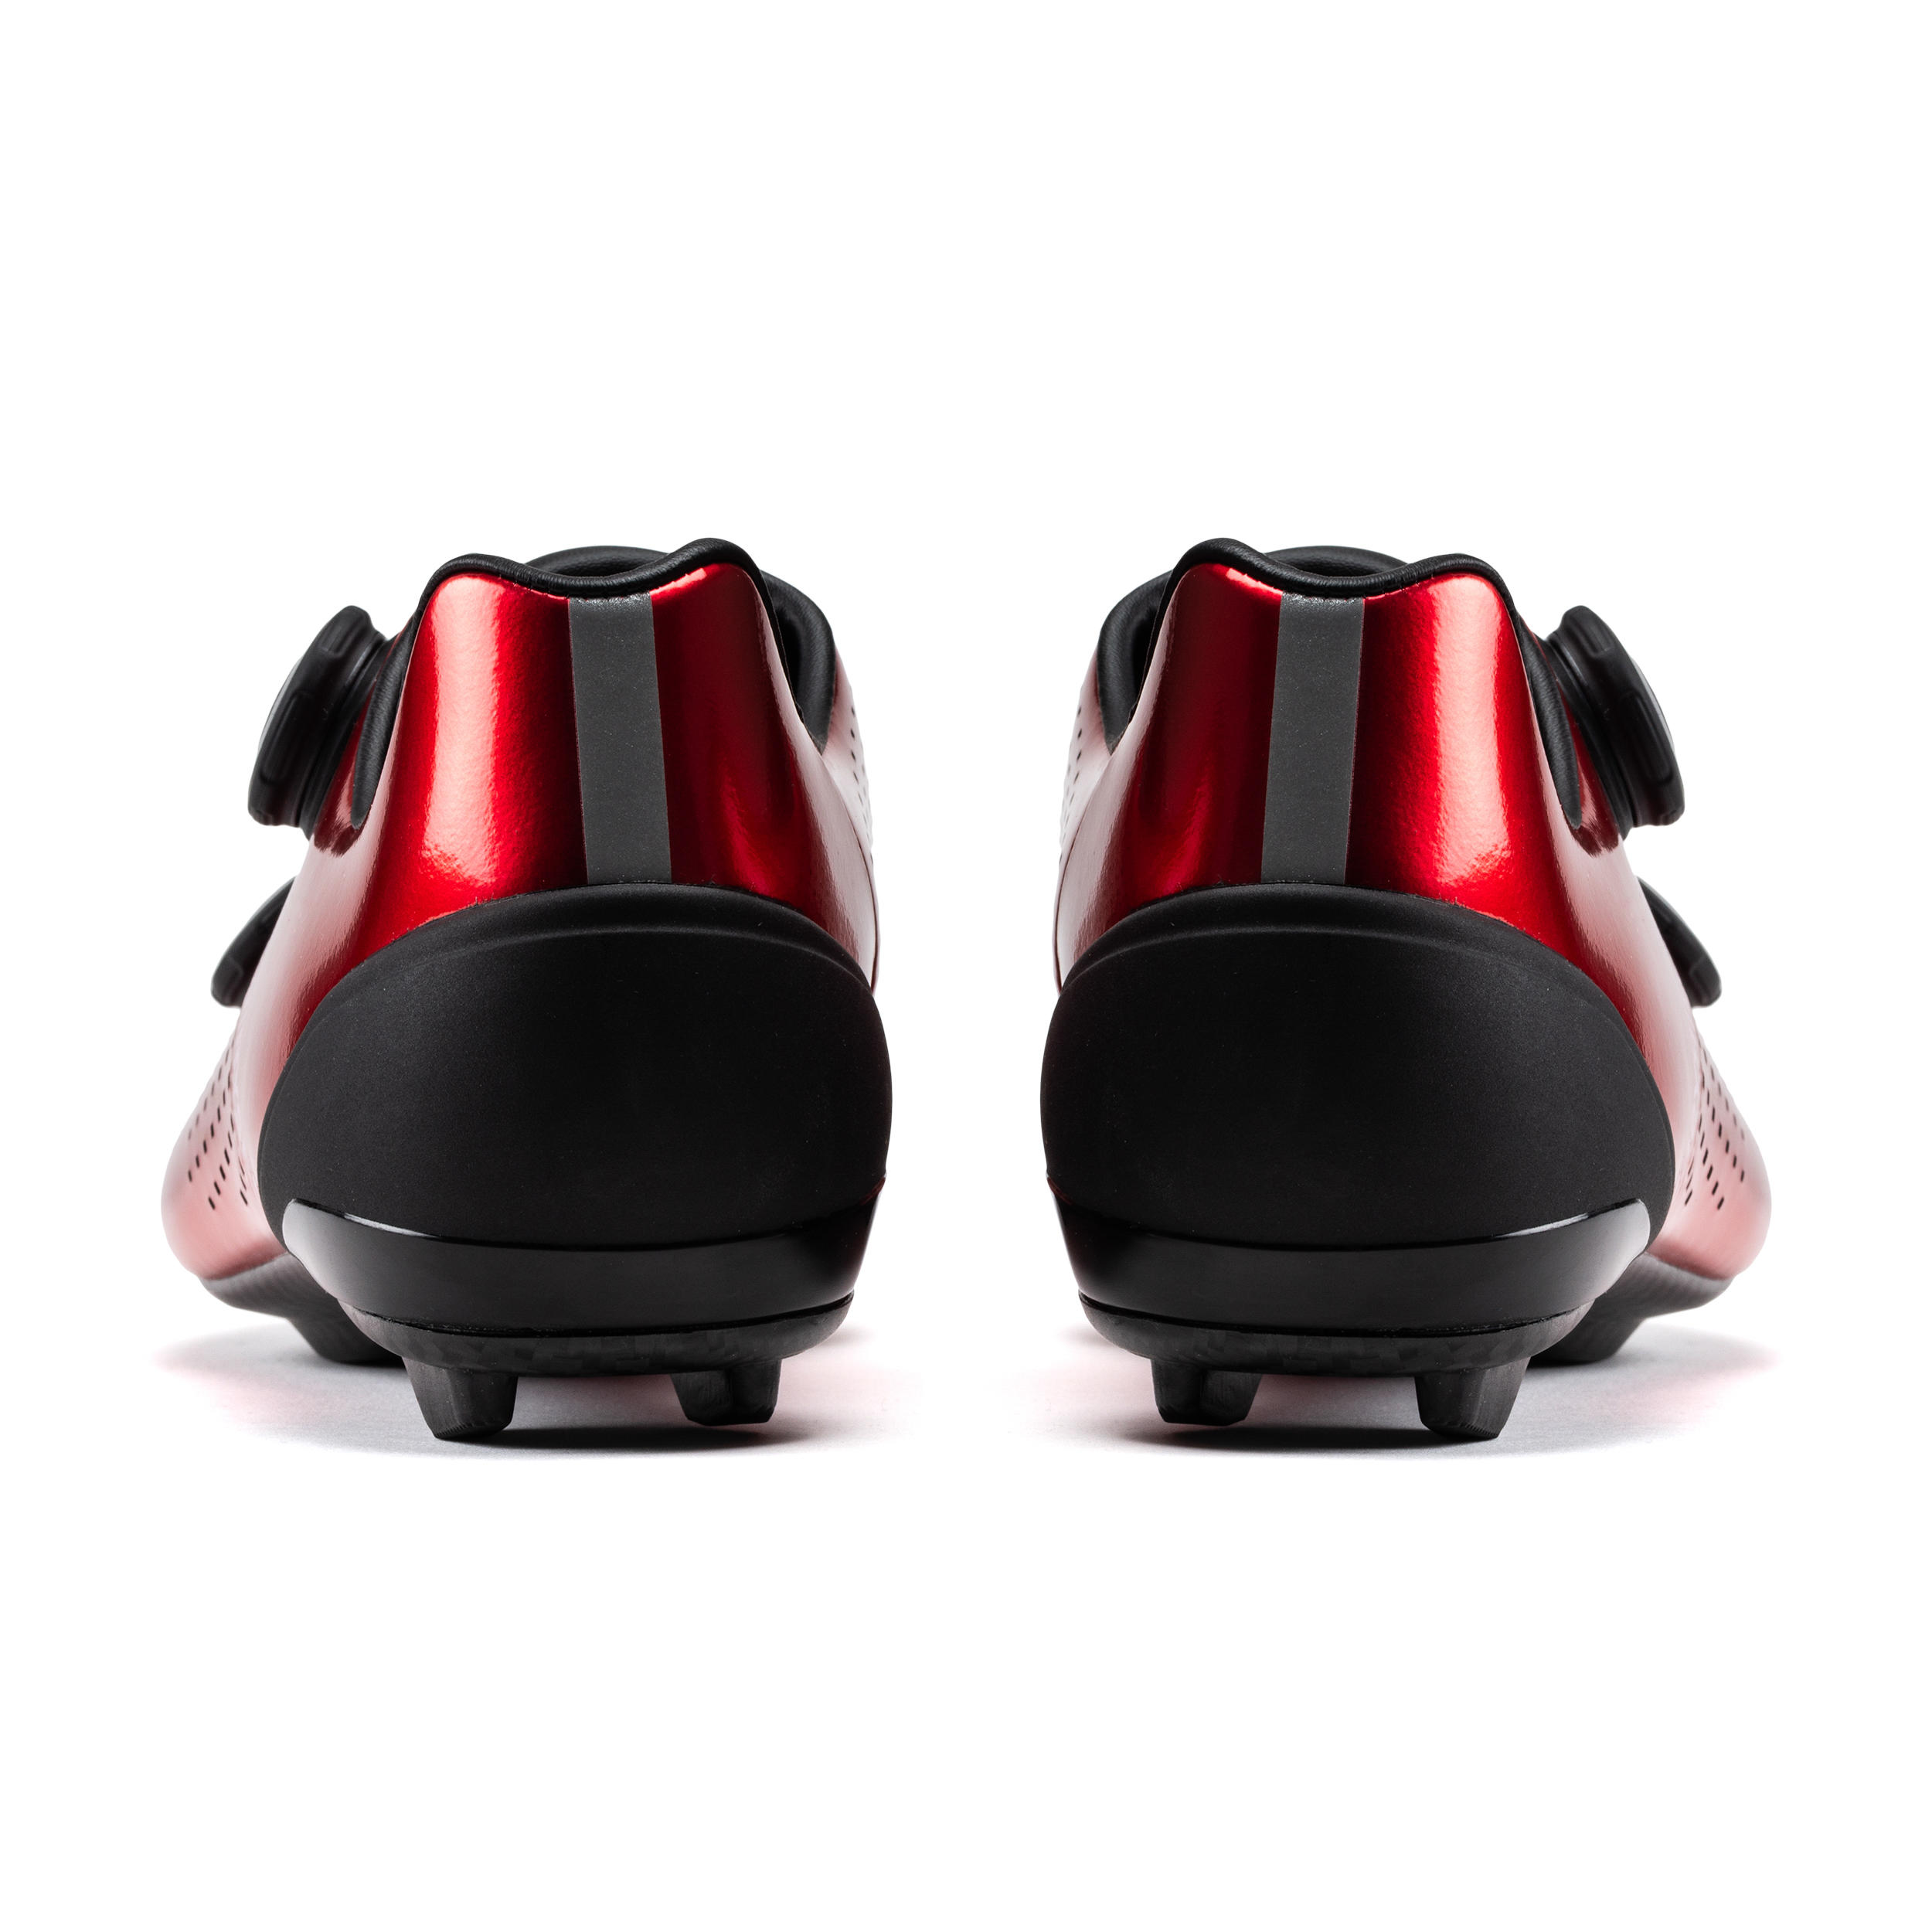 RoadR 900 Full Carbon Road Cycling Shoe - Red 6/6